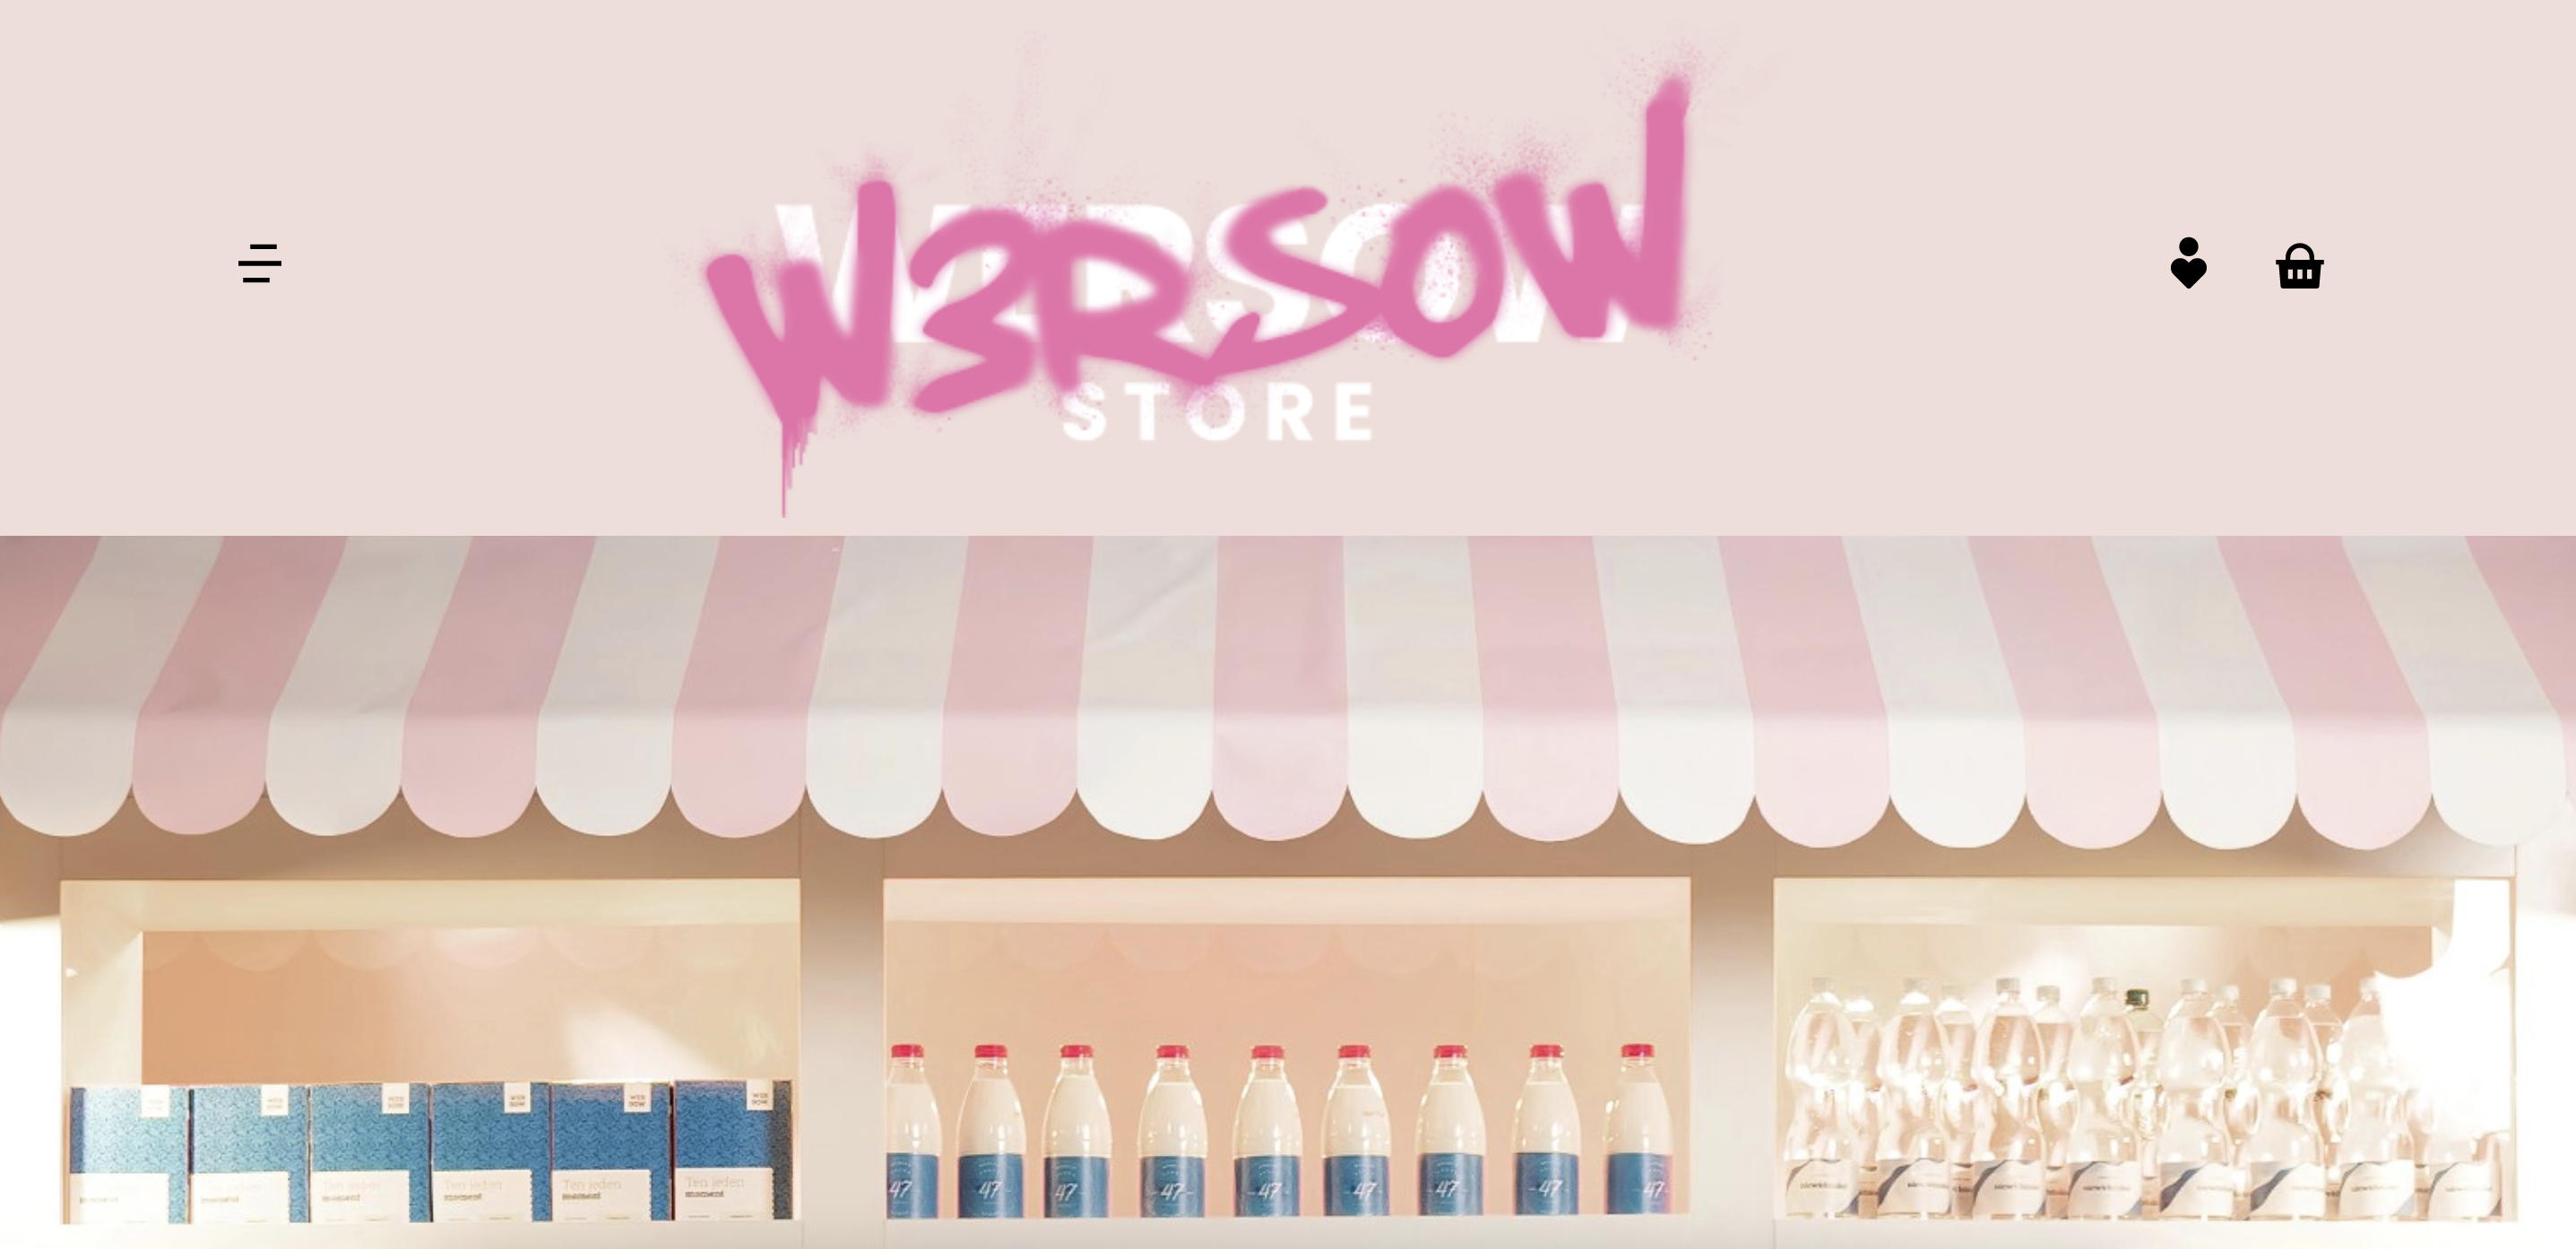 wersowstore.pl